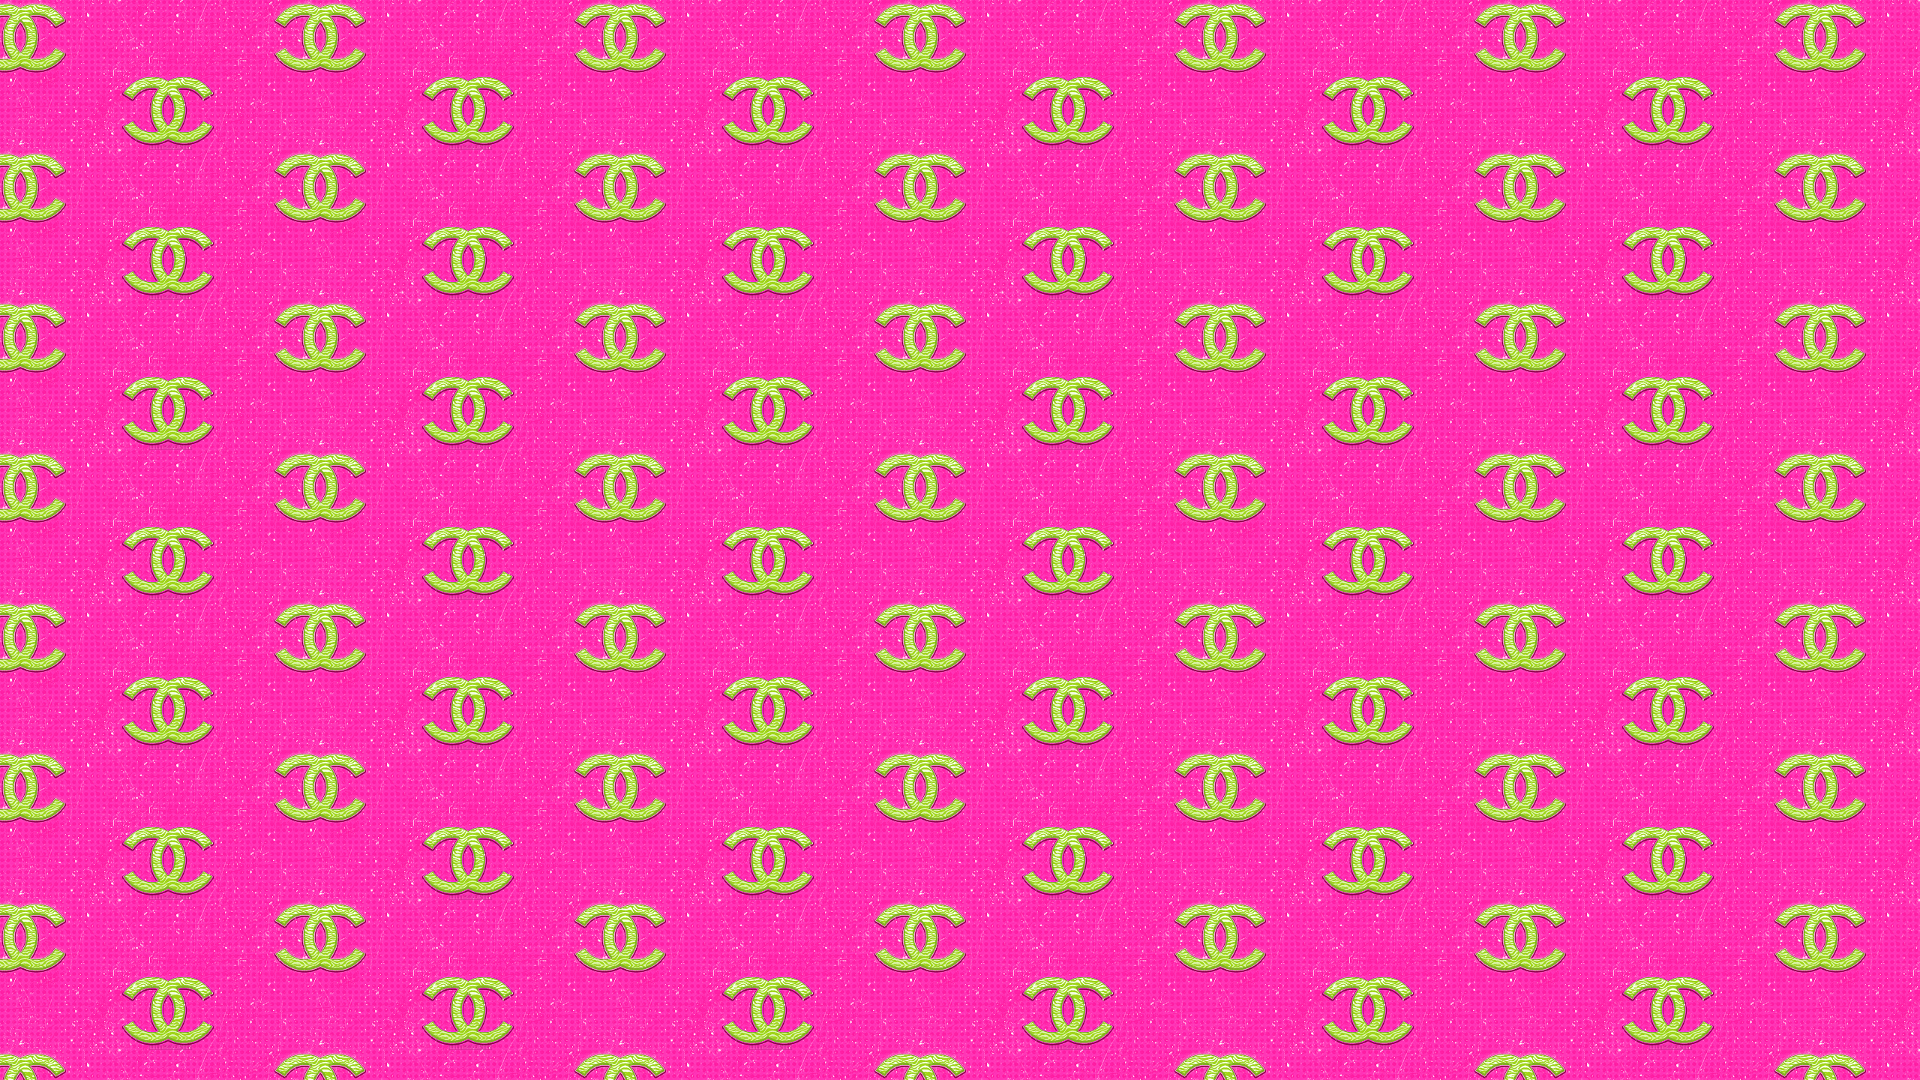 A pink background with a green Chanel pattern - Chanel